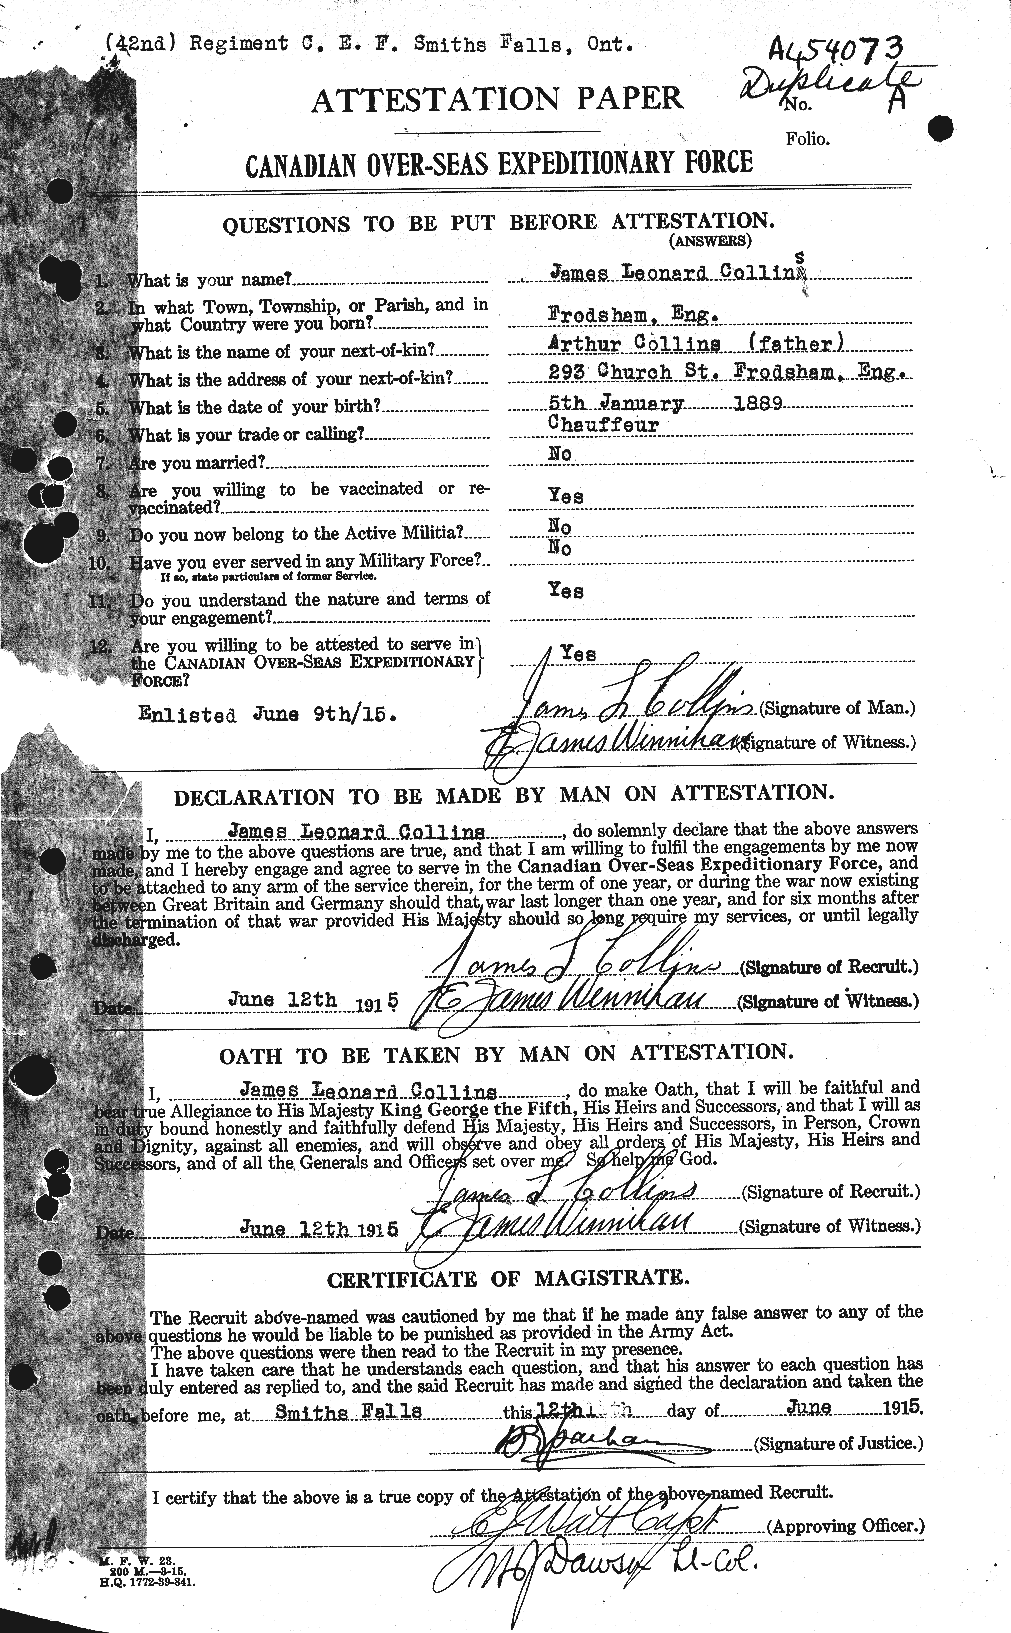 Personnel Records of the First World War - CEF 069945a